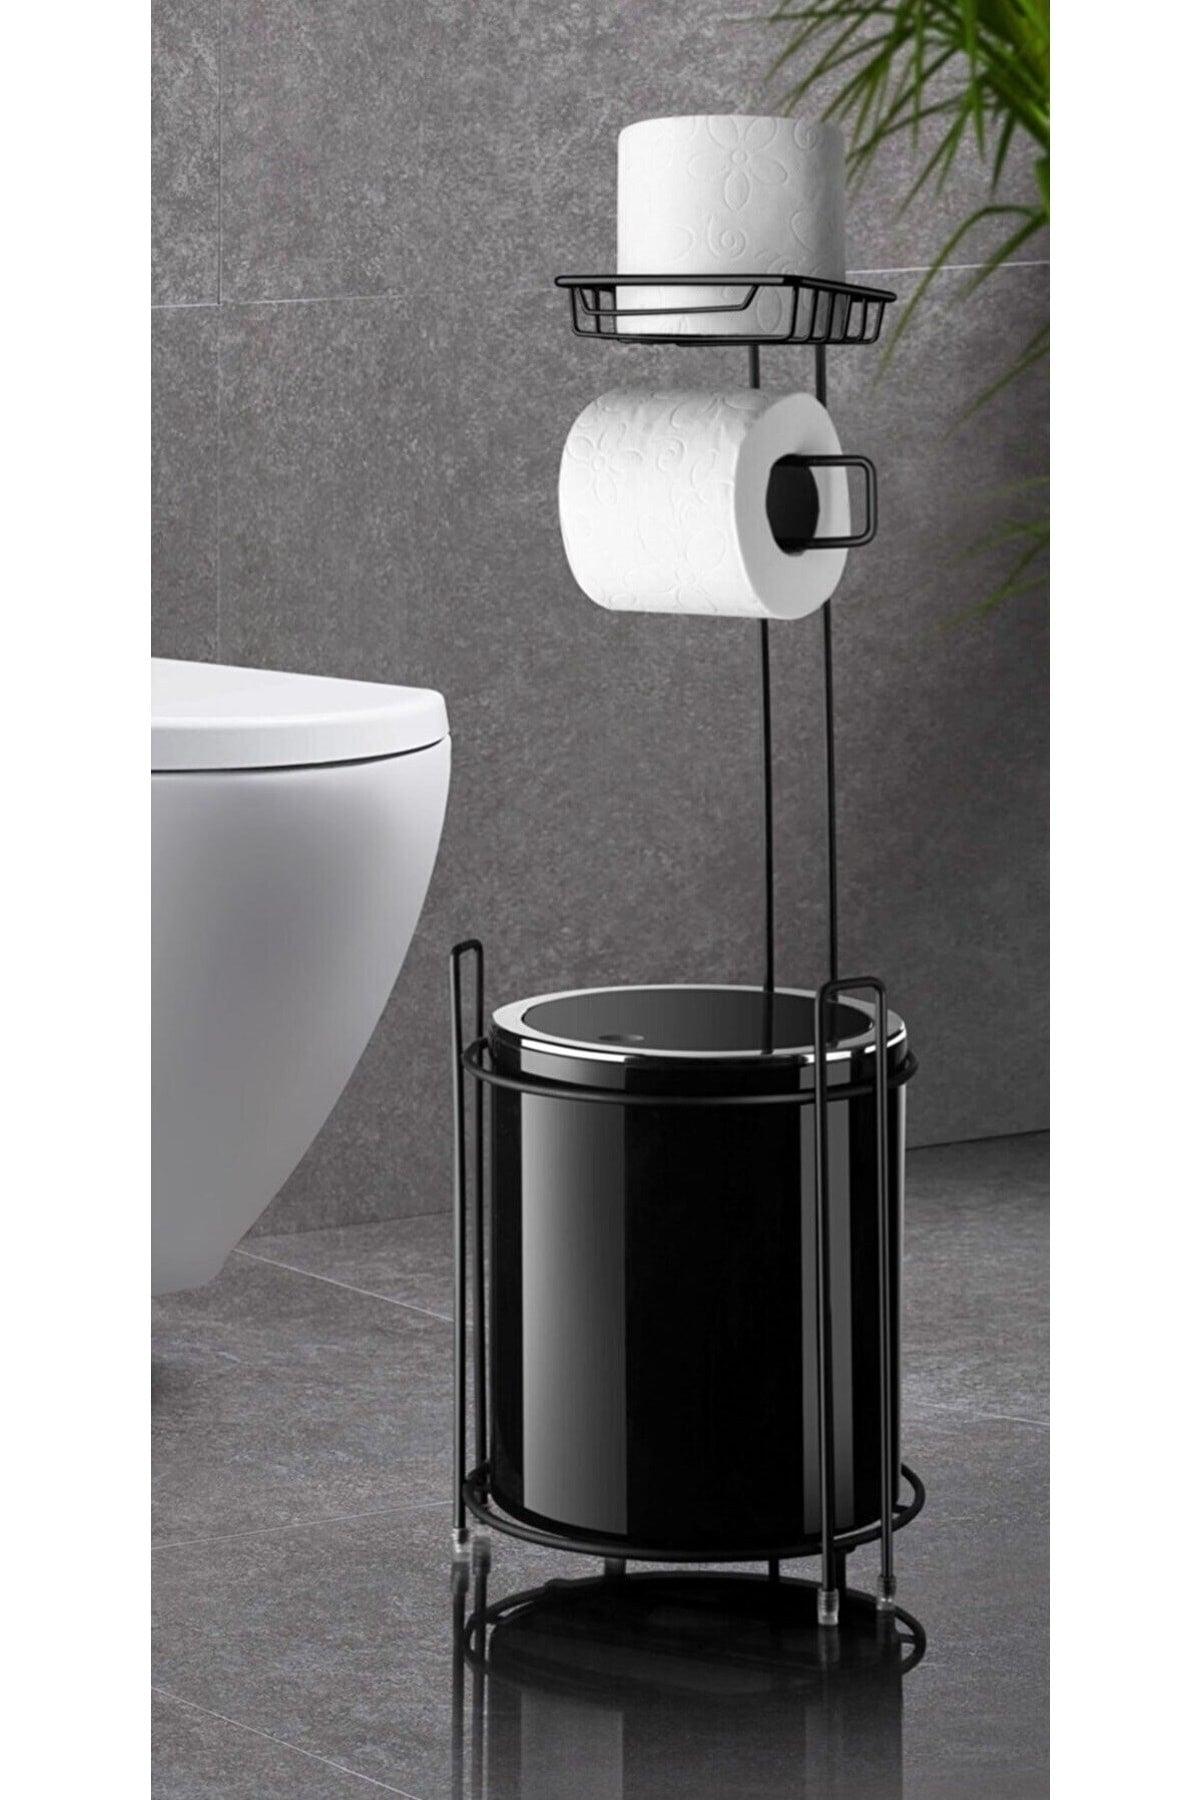 Black Backed Wc Paper Holder And Round Black Dustbin As-755s - Swordslife